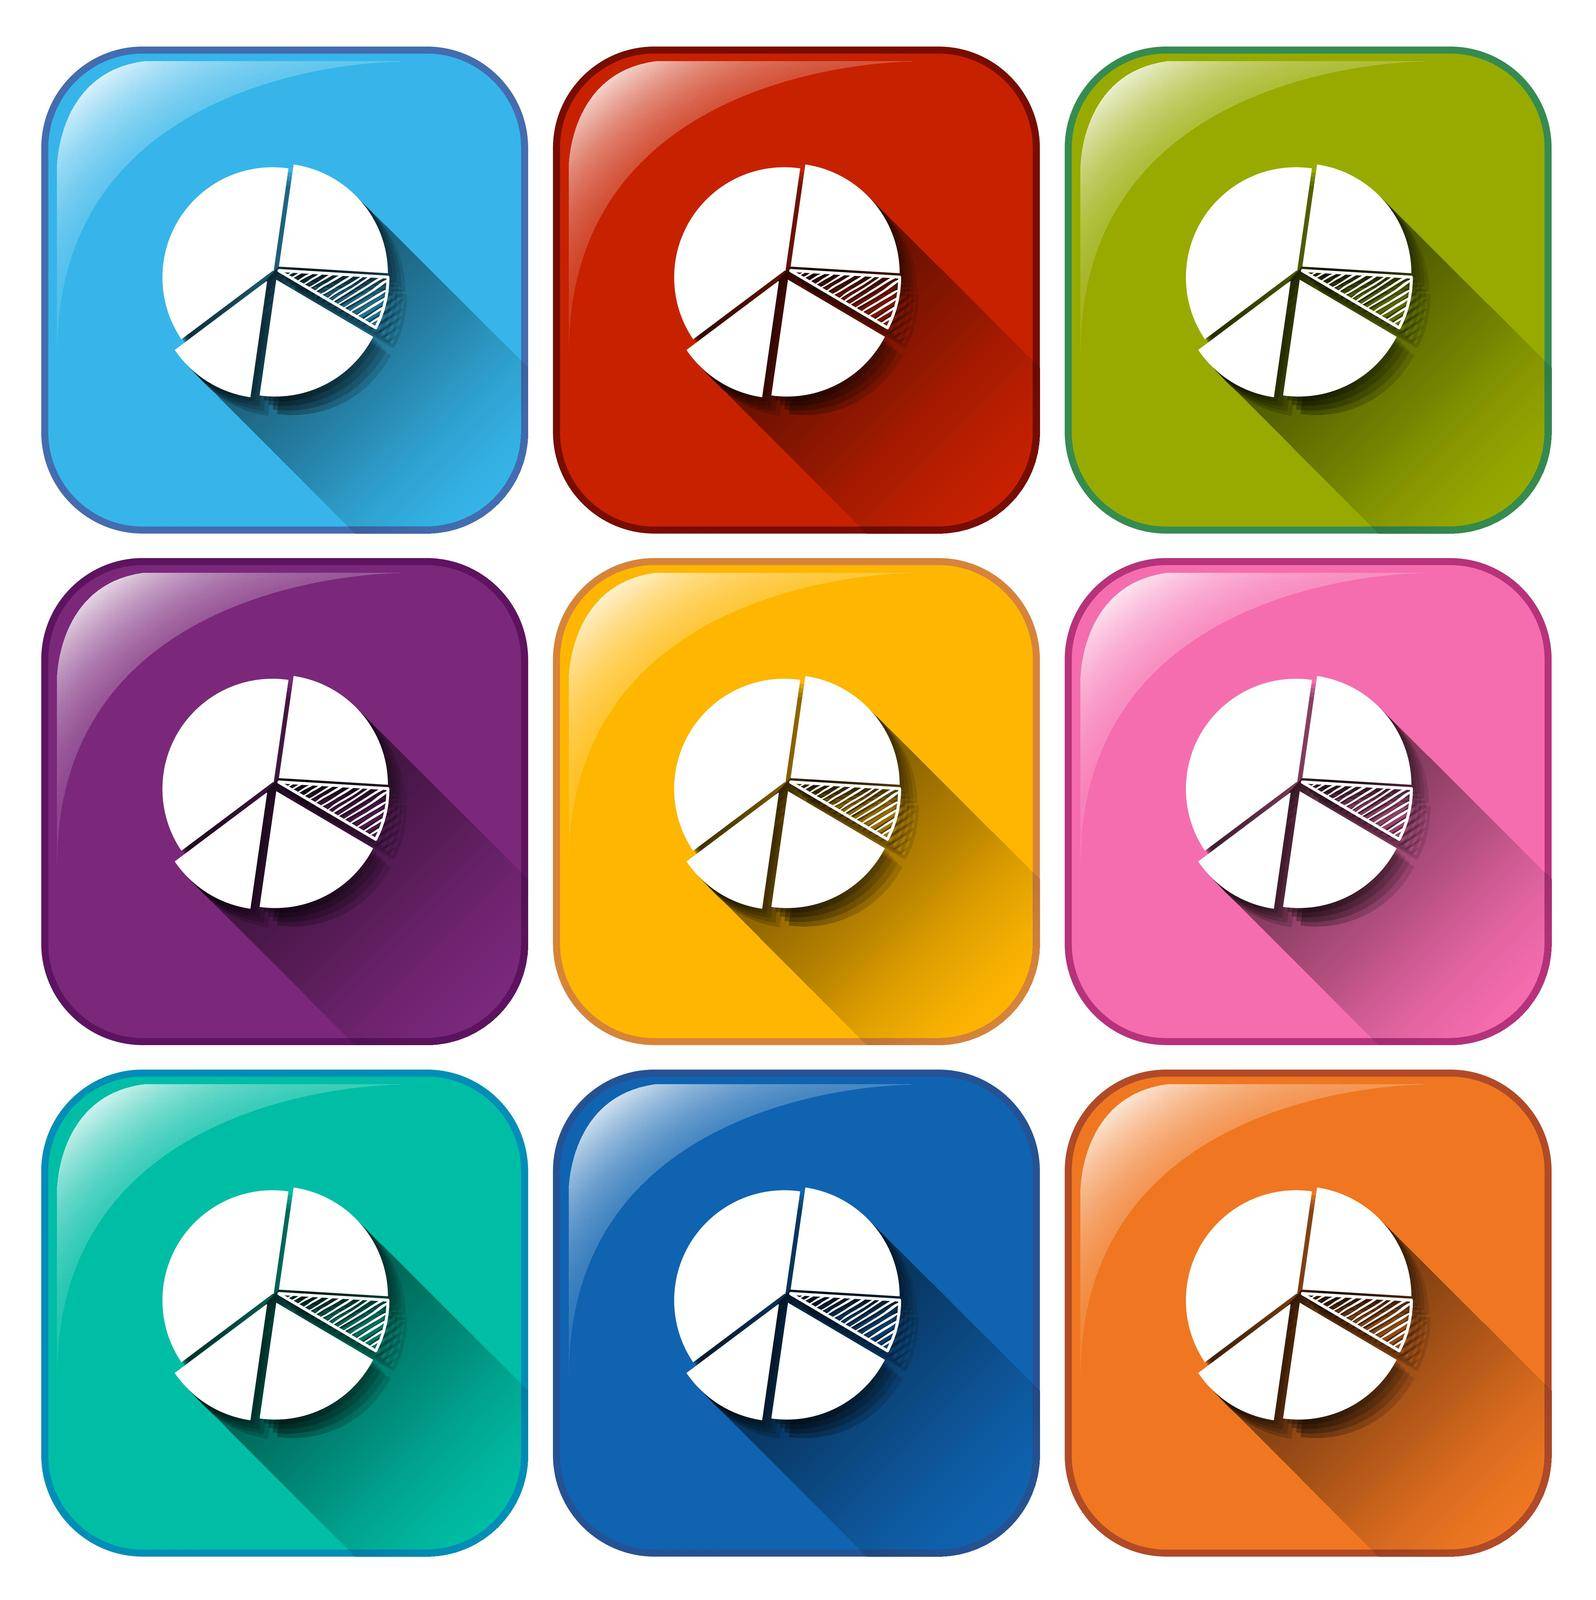 Rounded buttons with circular graphs by iimages